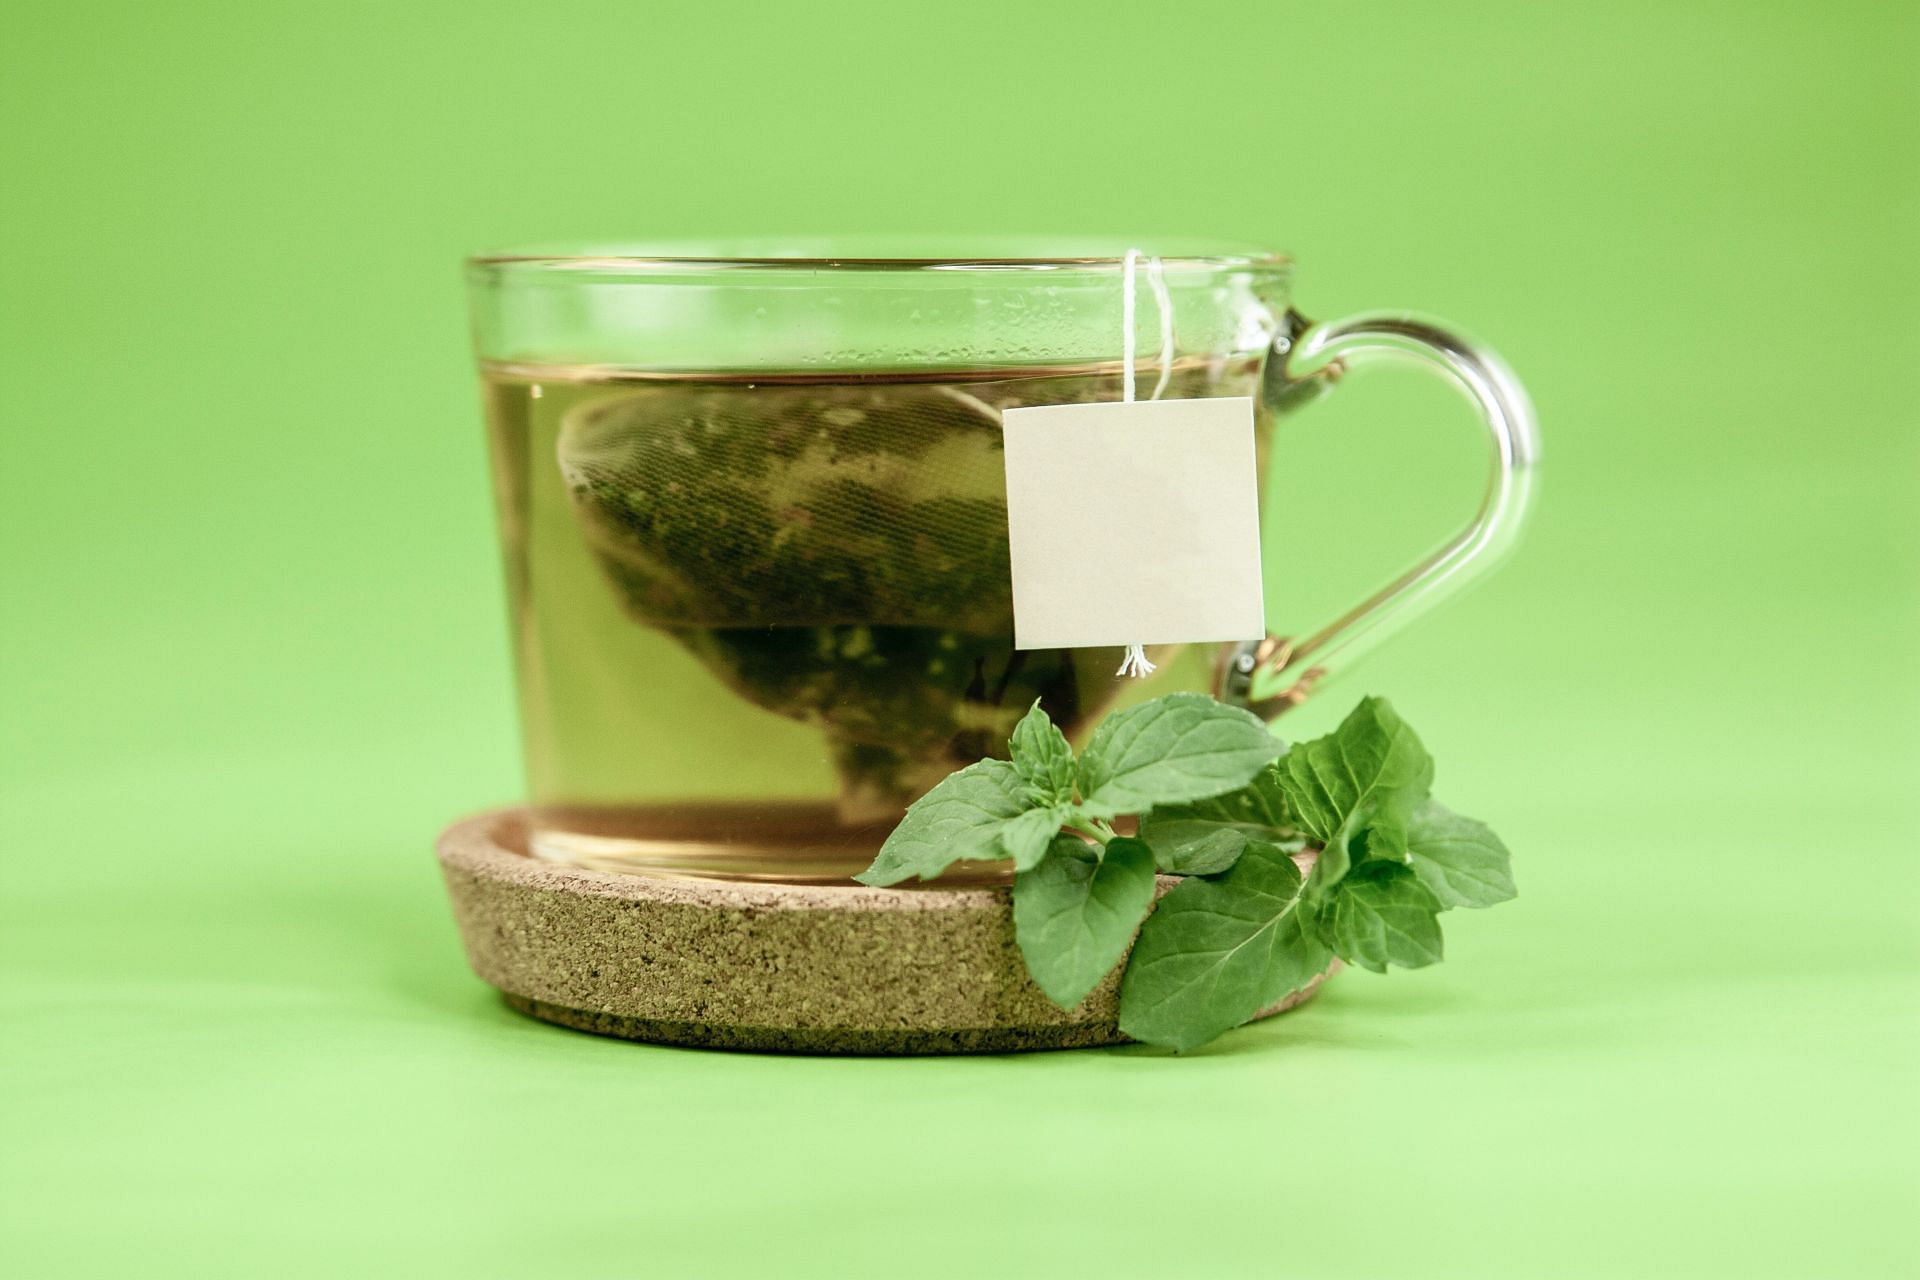 Green tea is great for weight loss. Here are some arguments in its favor. (Image via unsplash/Laark Boshoff)